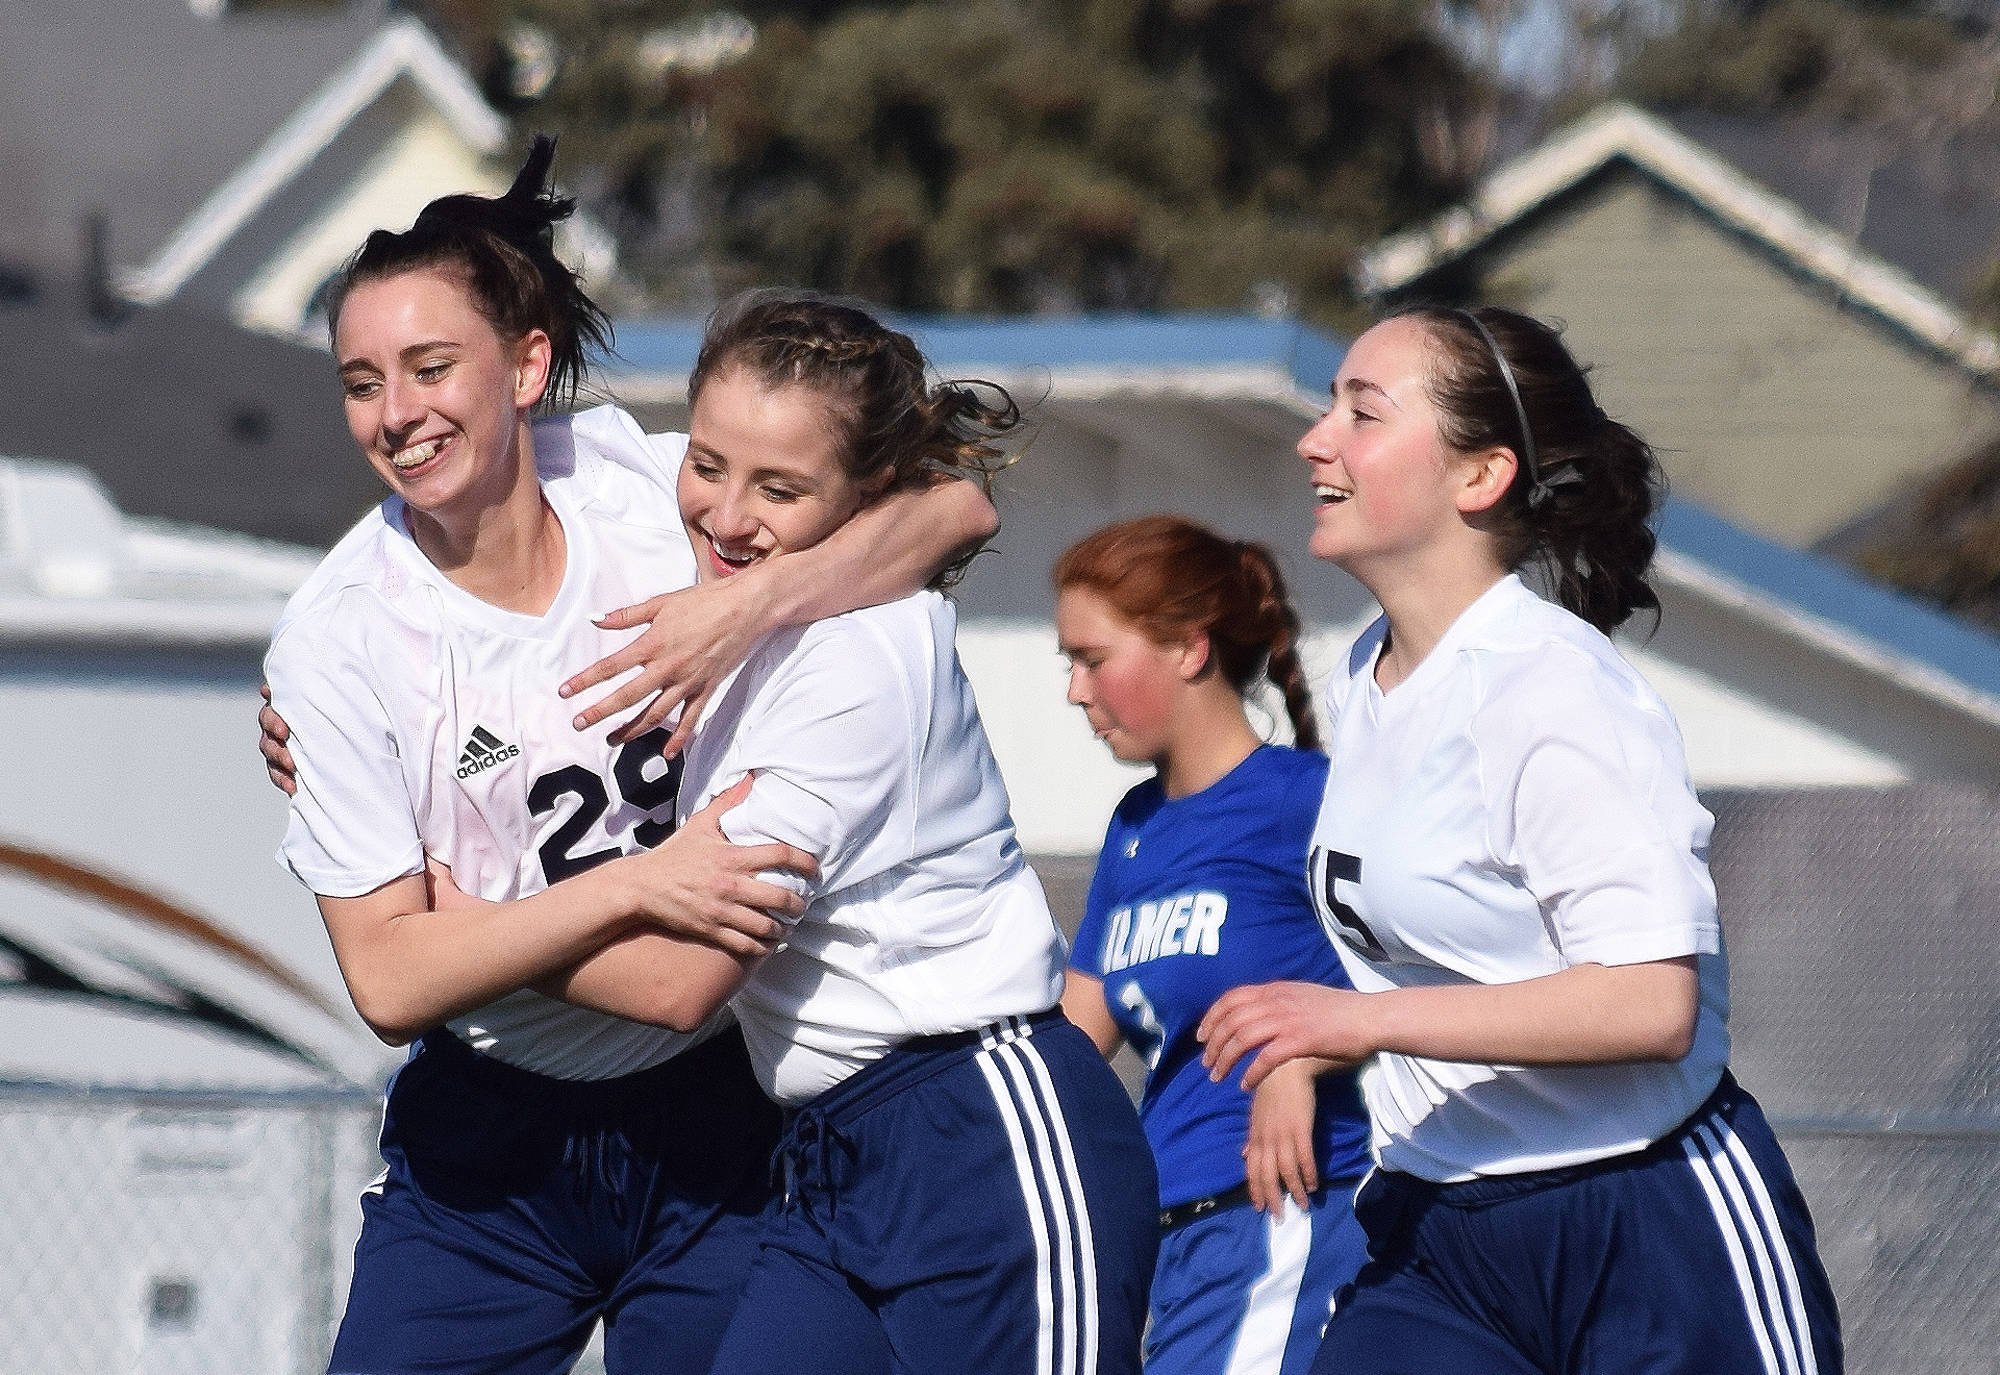 Soldotna’s Abi Tuttle (left) congratulates freshman teammate Ryann Cannava on her second-half goal against Palmer, Friday afternoon at Justin Maile Field in Soldotna. (Photo by Joey Klecka/Peninsula Clarion)